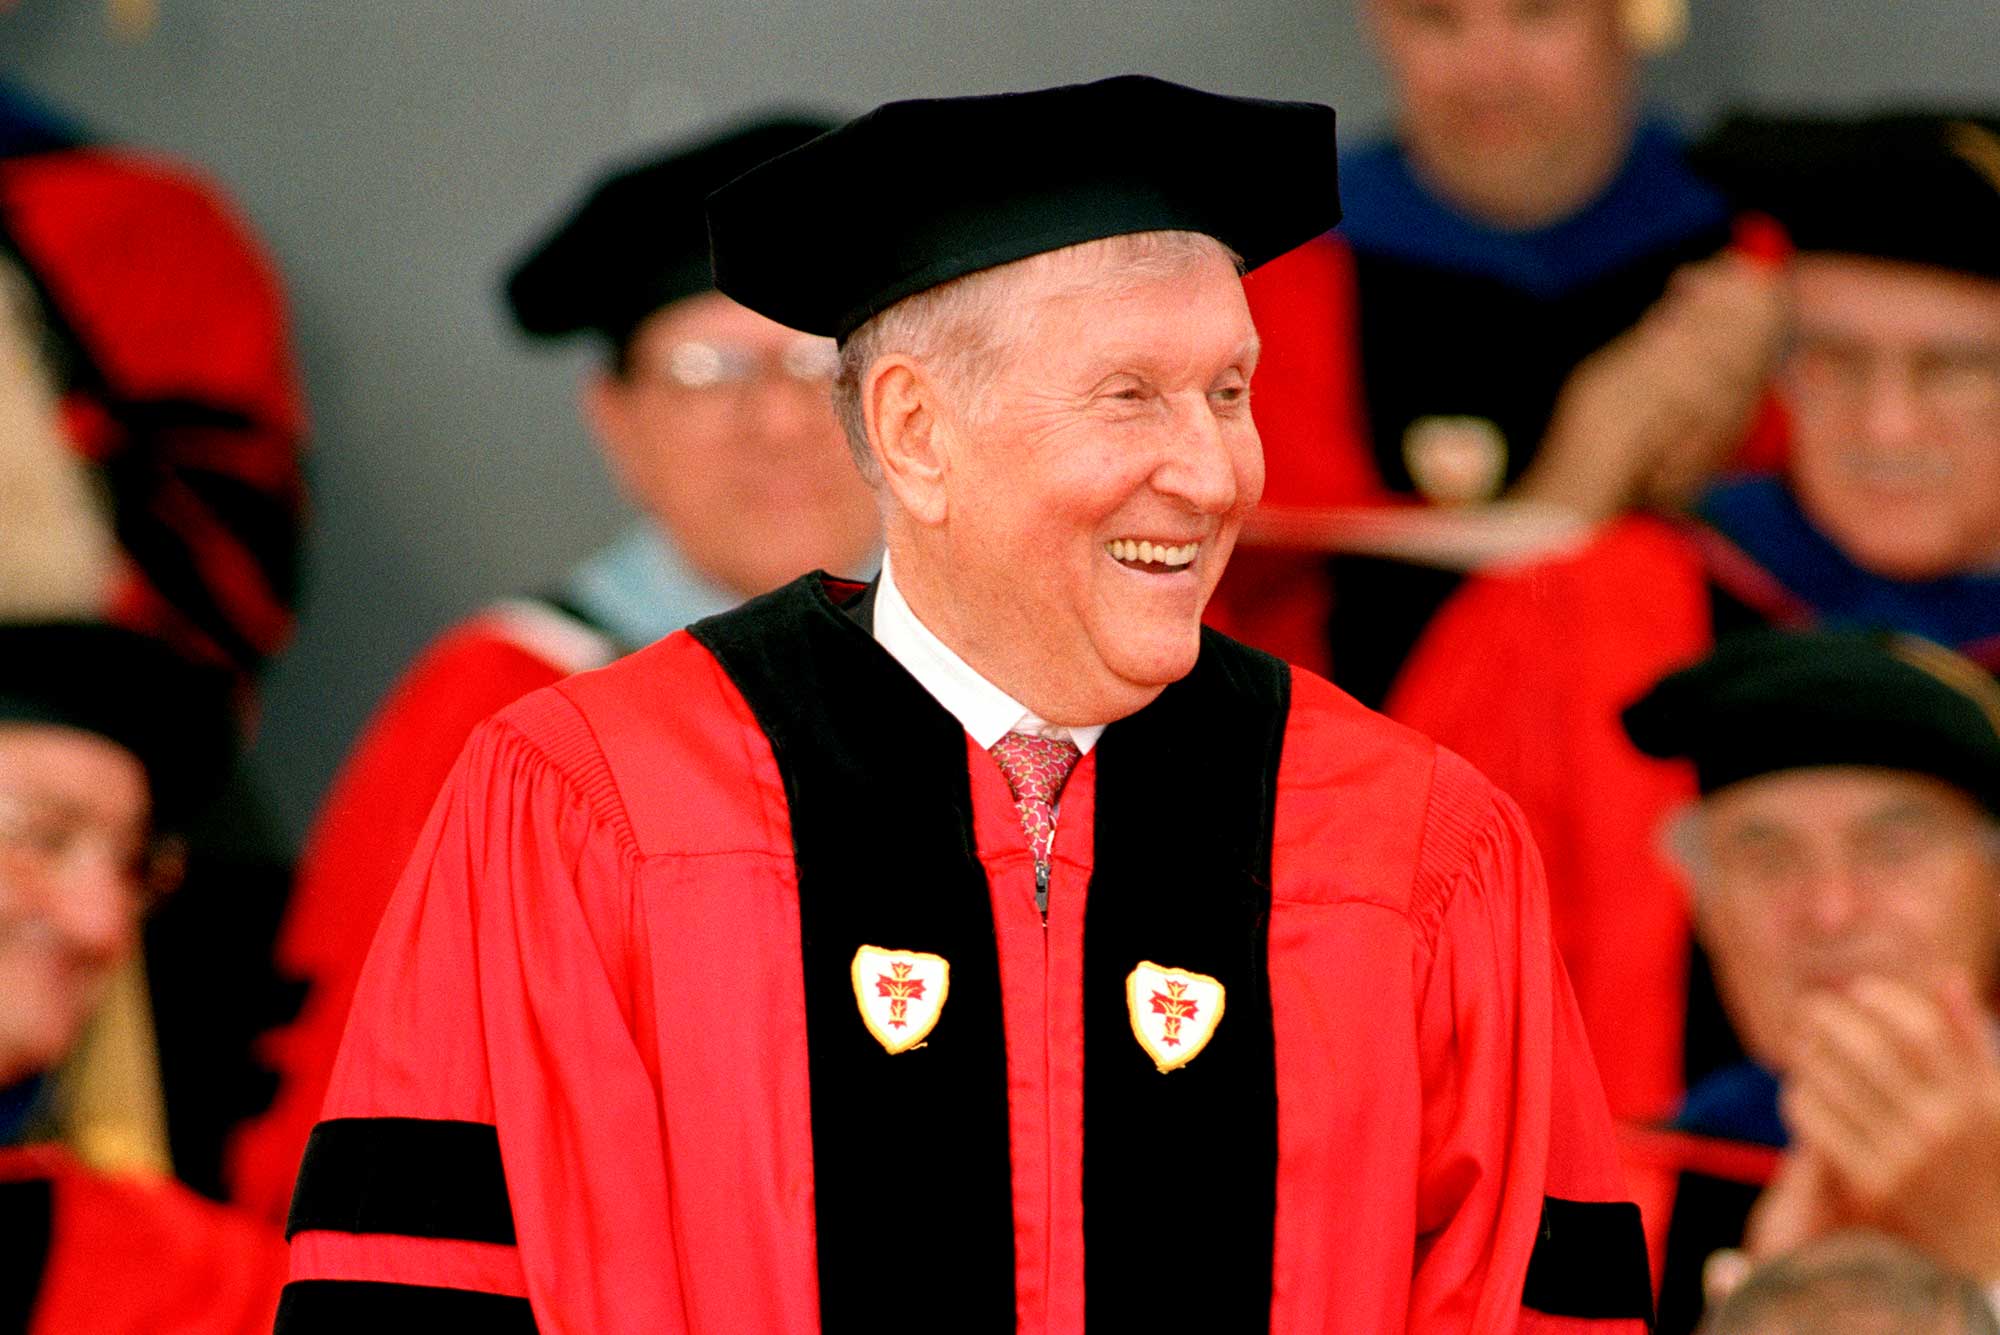 Sumner Redstone accepts his honorary degree at Boston University's 1994 Commencement ceremony